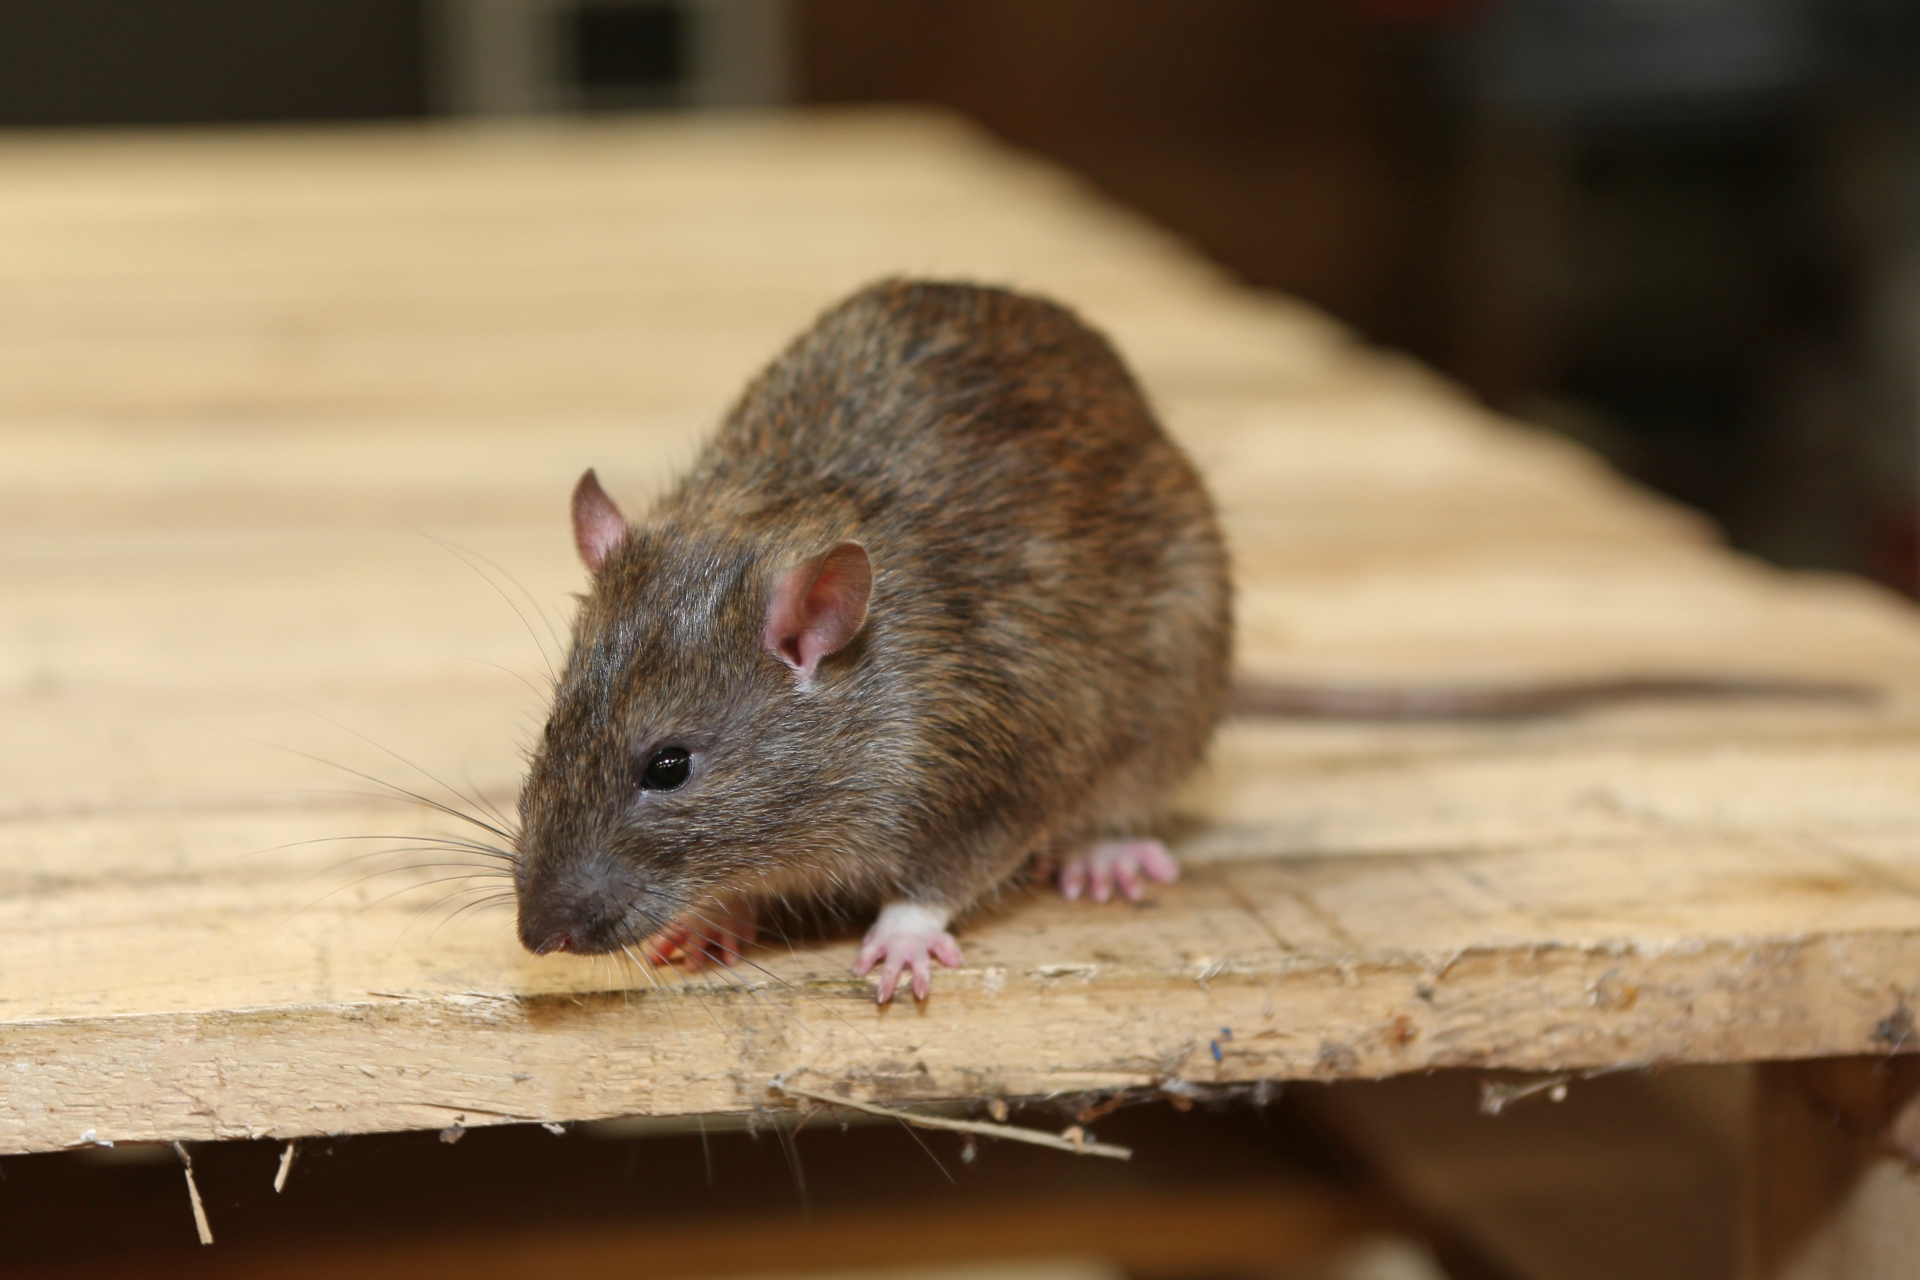 Rat Infestation, Pest Control in Soho, W1. Call Now 020 8166 9746